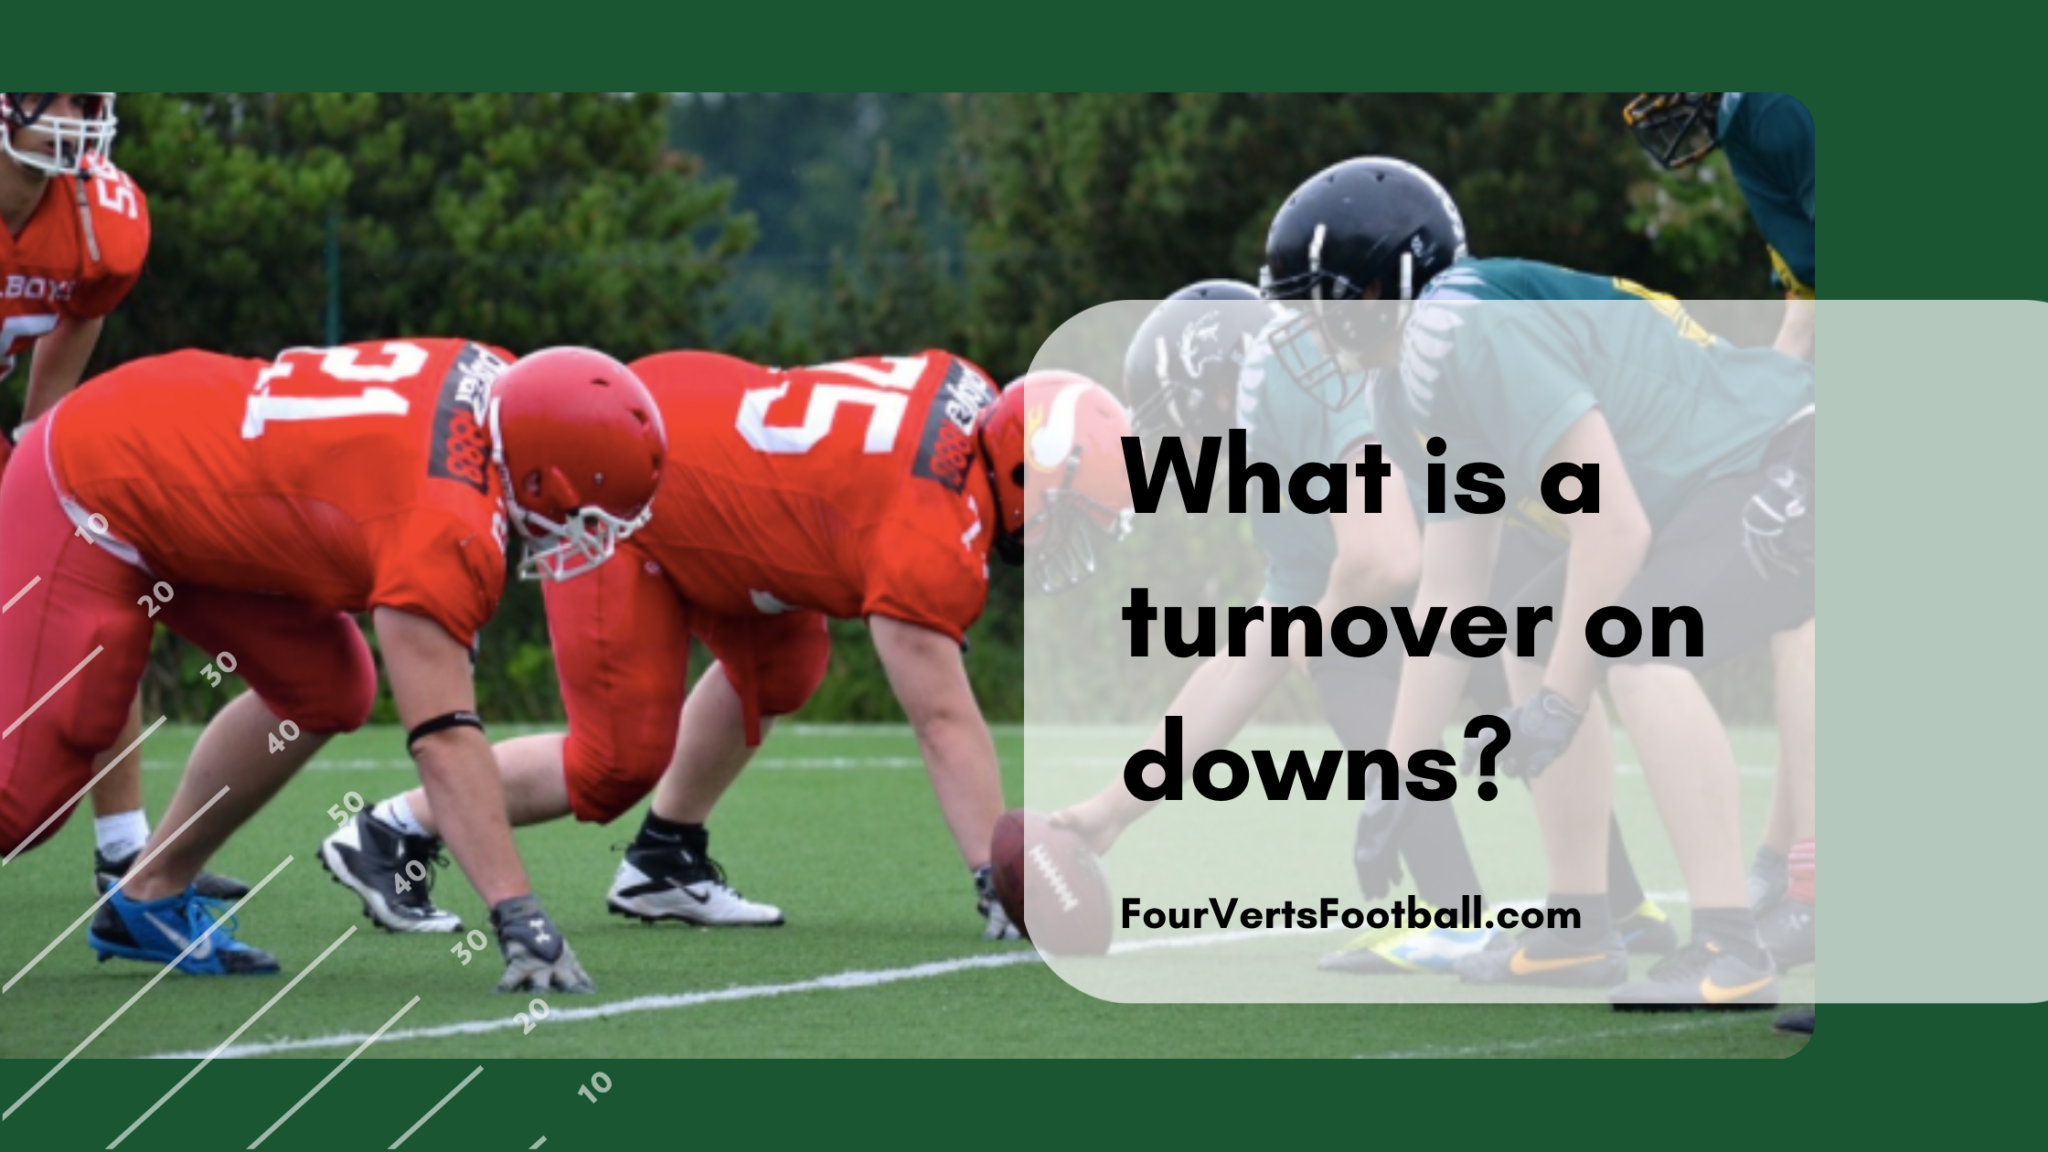 turnover football meaning